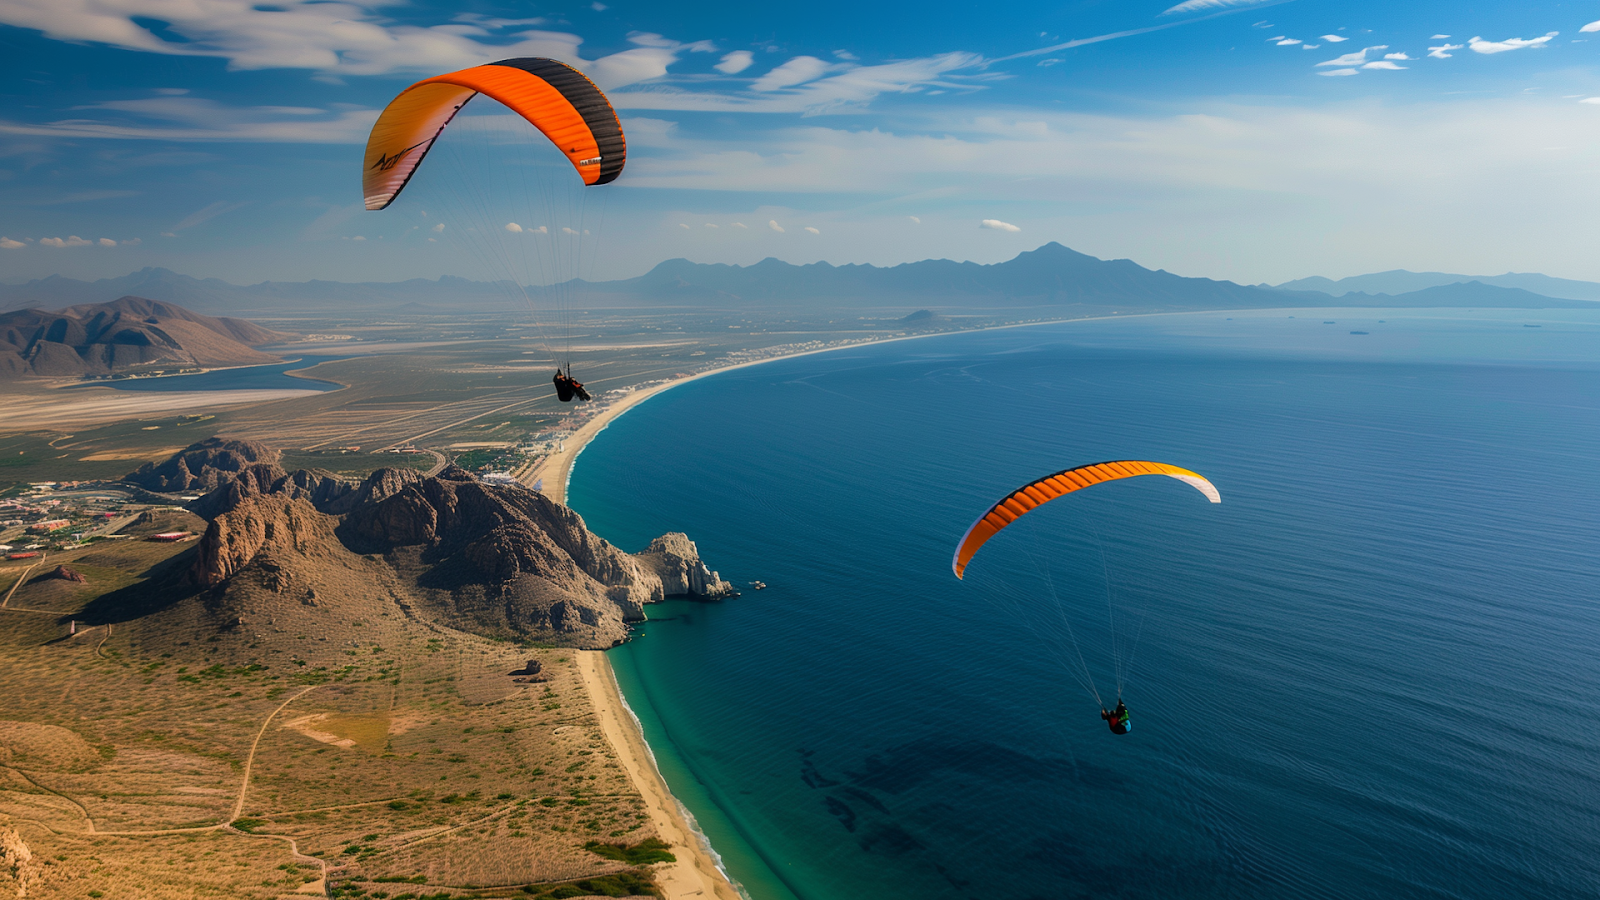 Paragliders soaring above Medano Beach with Sea of Cortez views